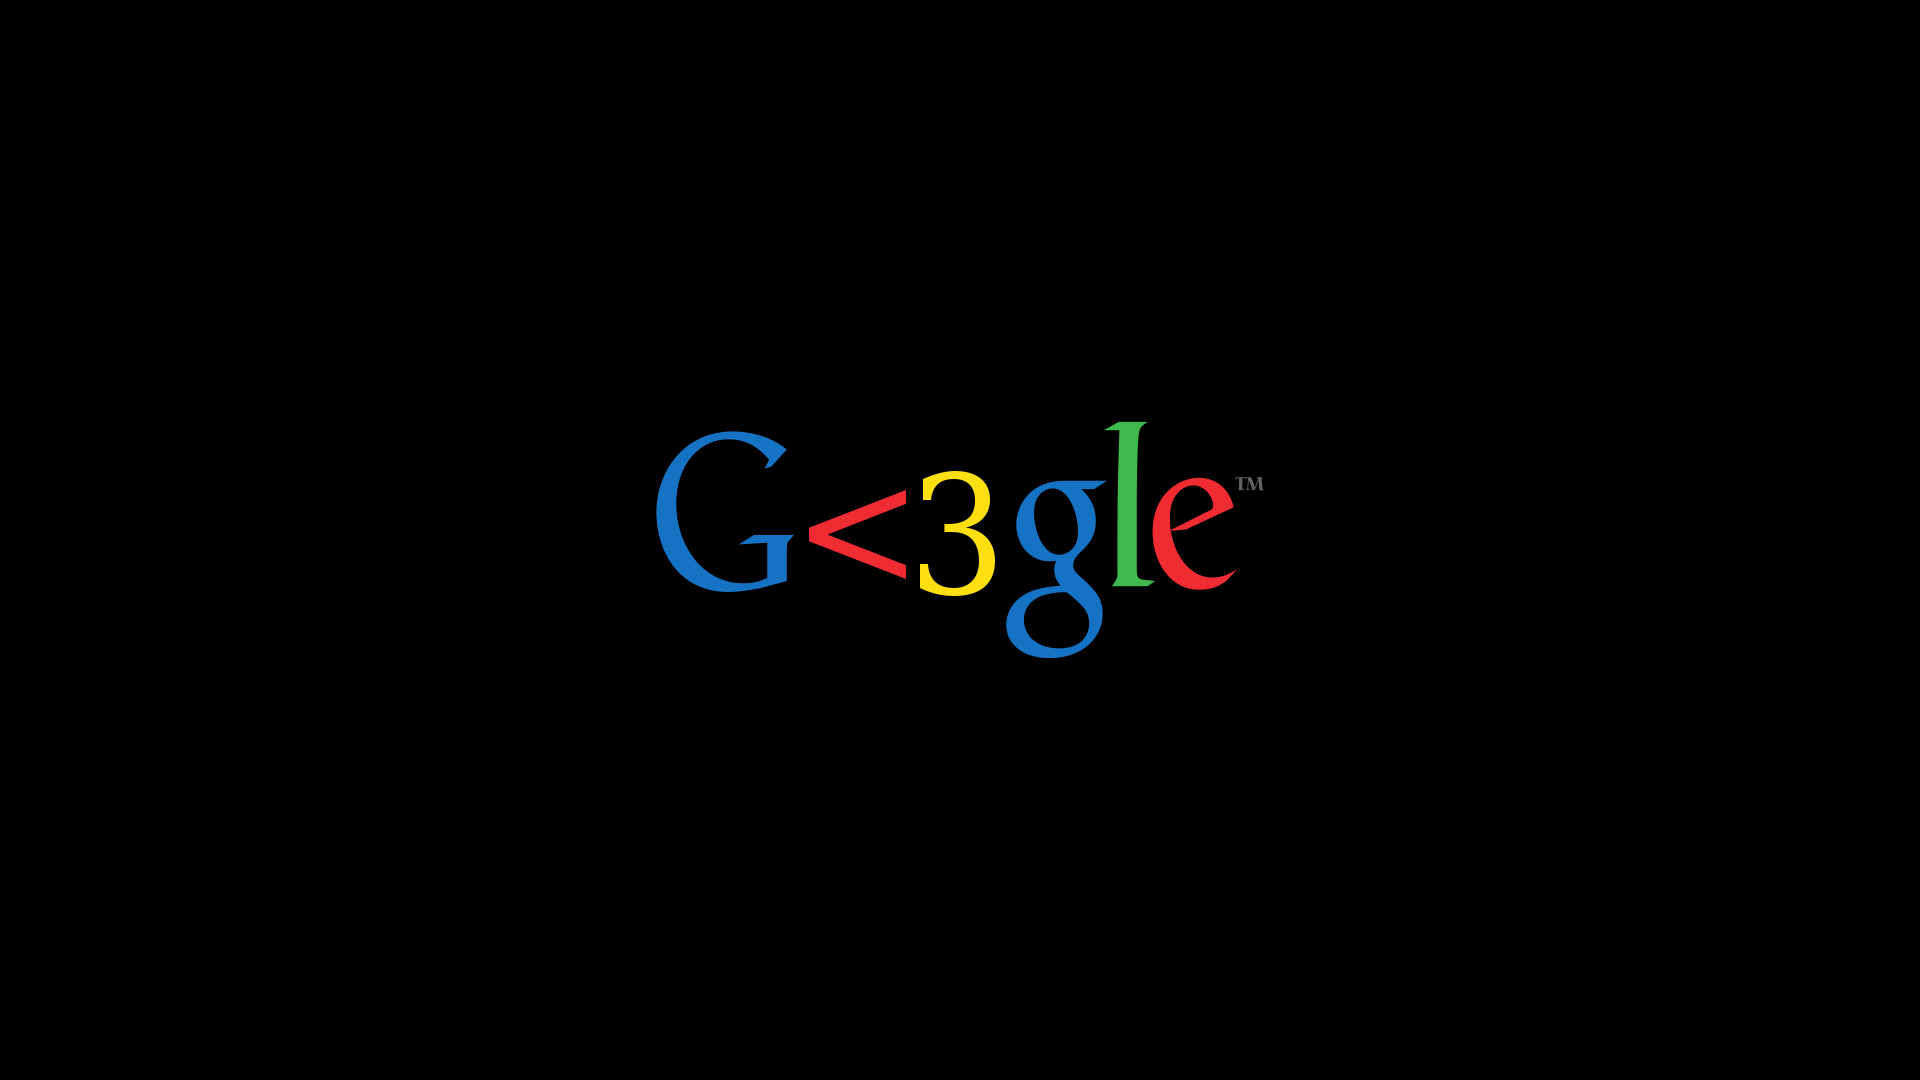 Google Wallpaper, Image Collection of Google